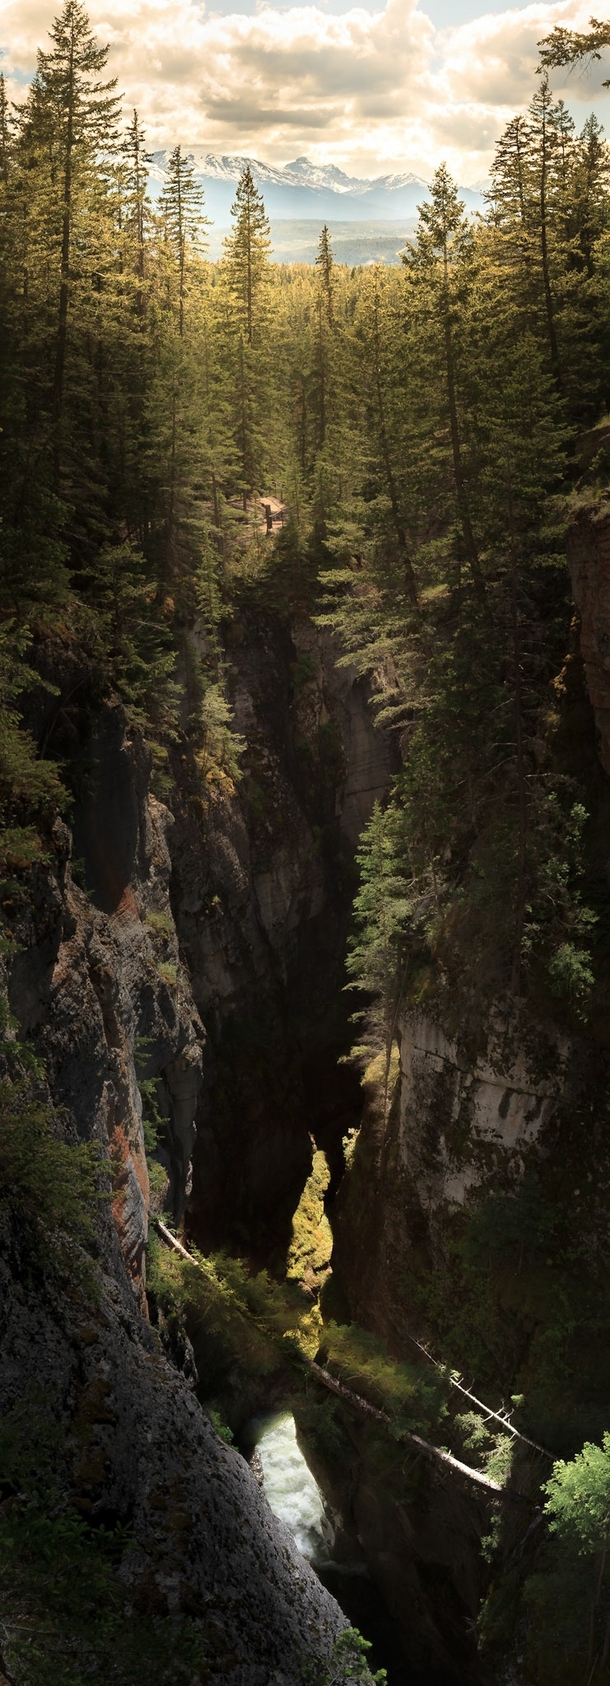 Theres more to the Rockies than just banff Maligne Canyon Jasper National Park 